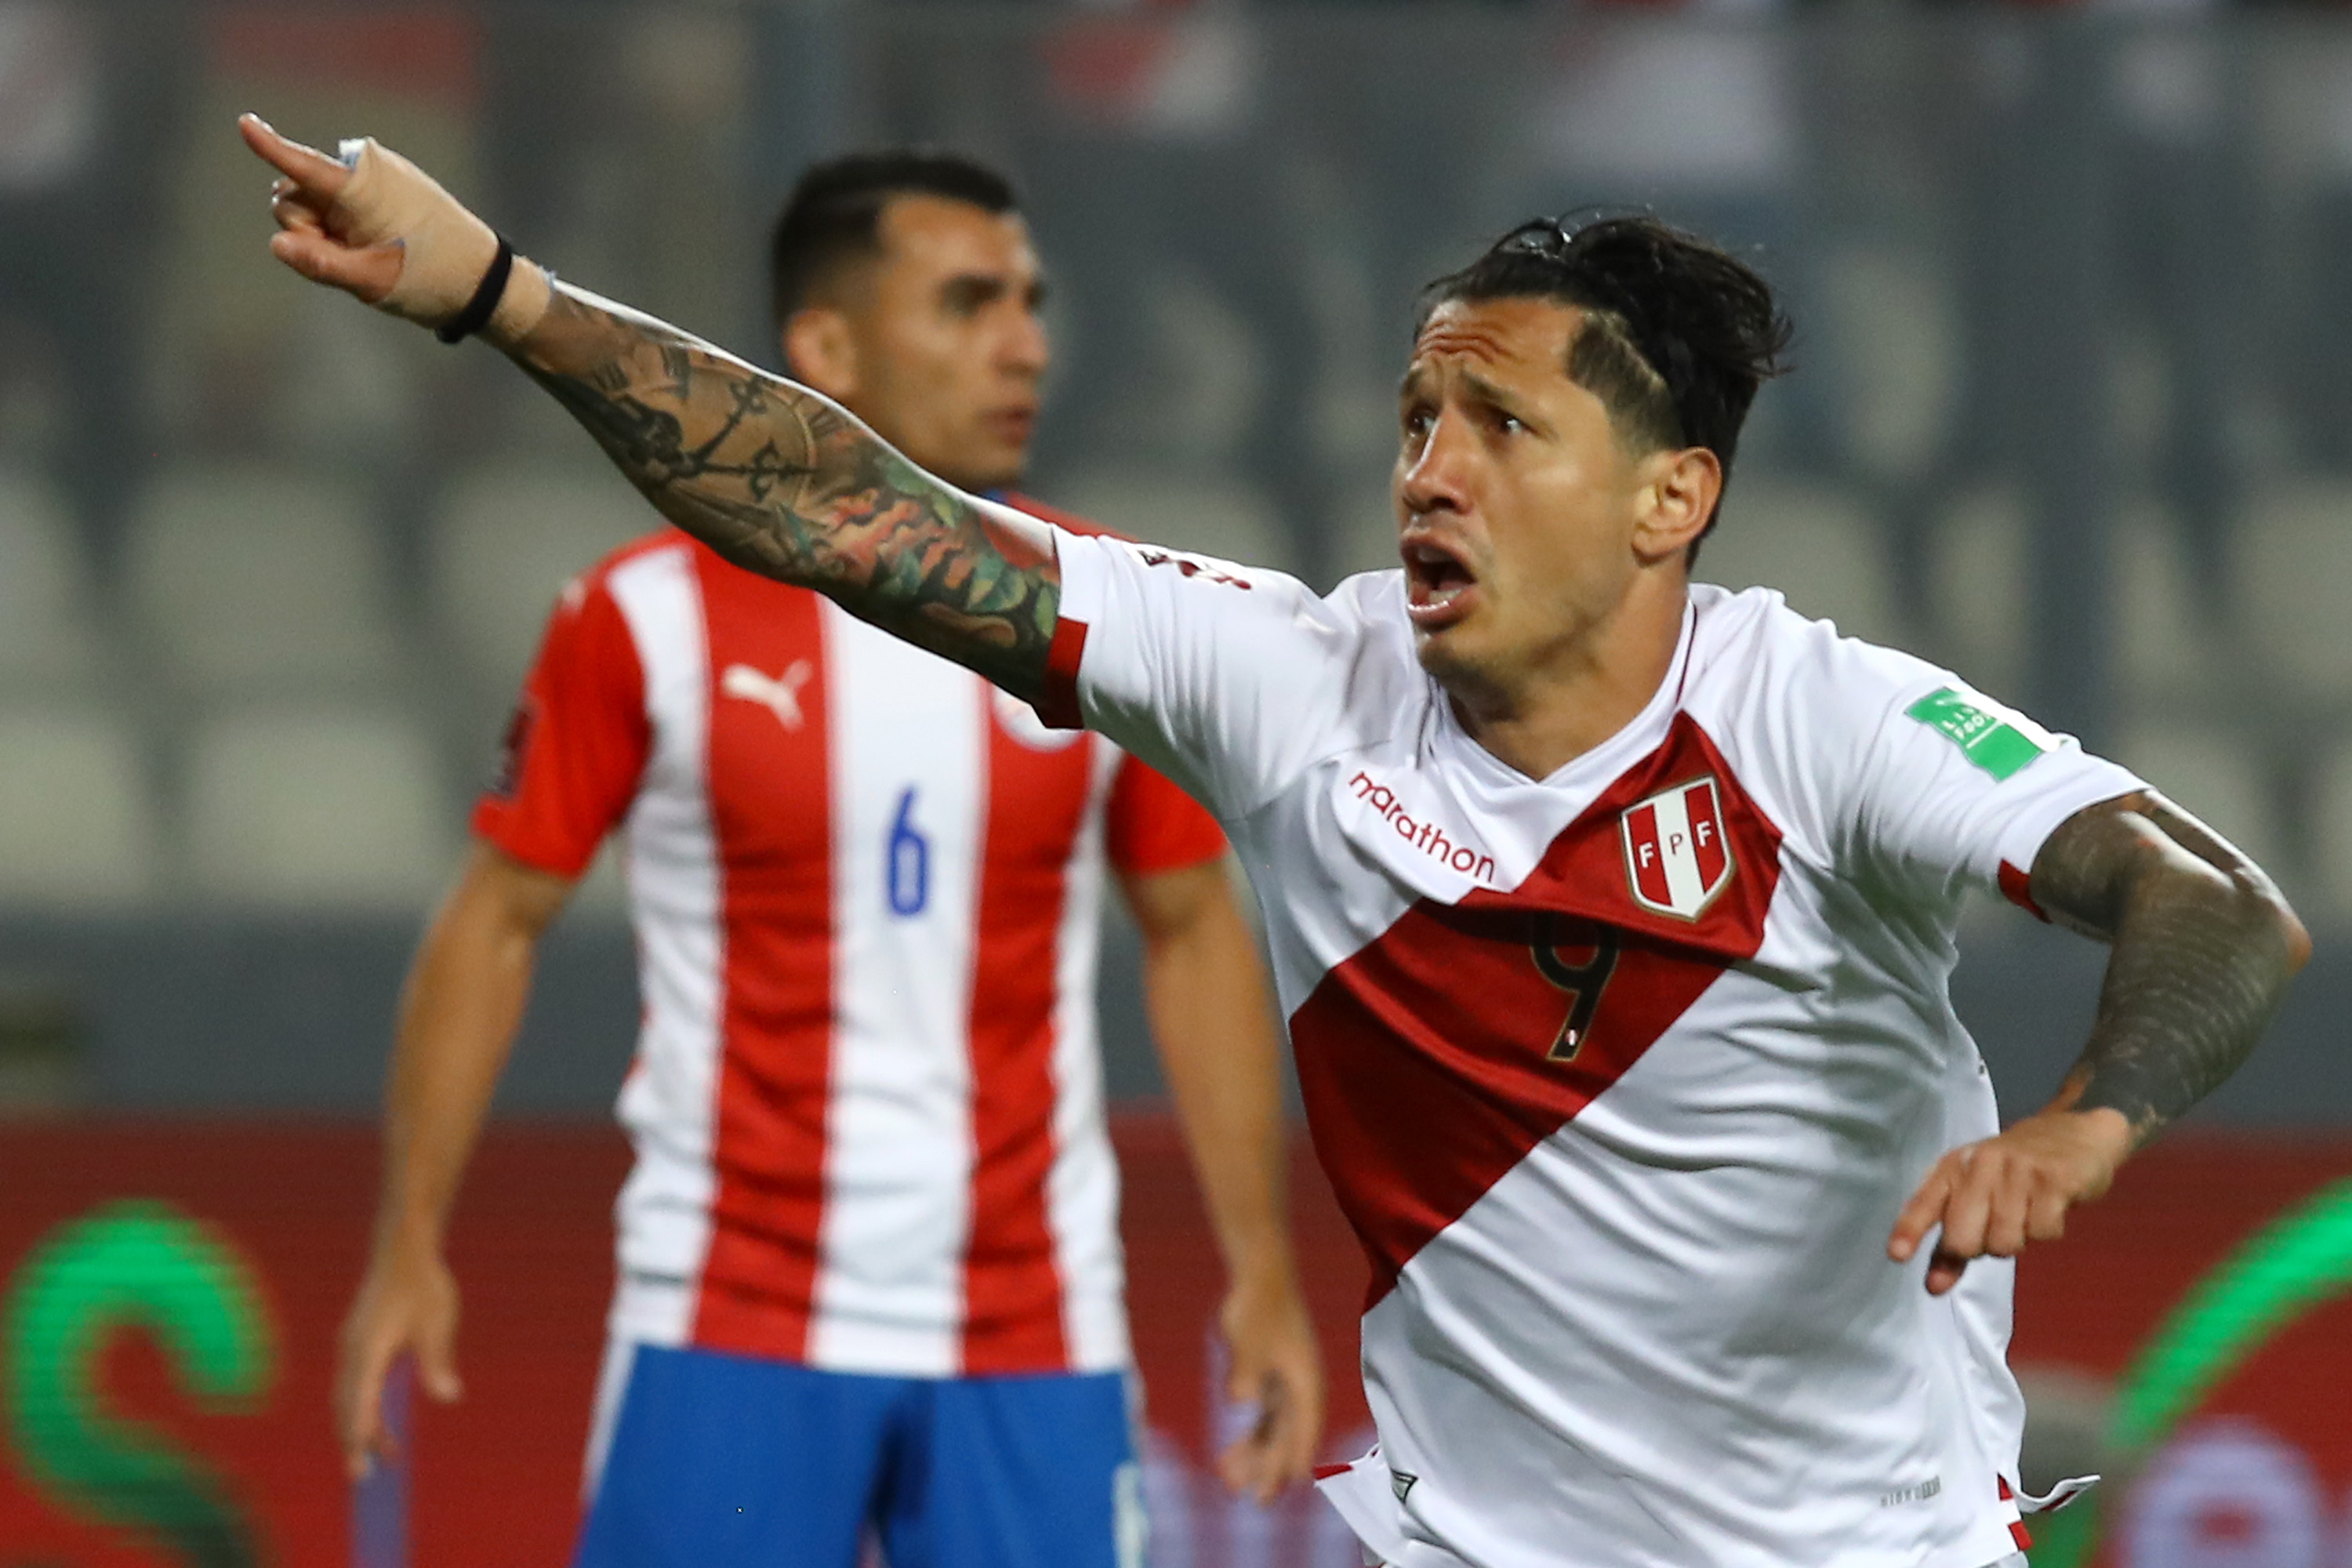 World Cup: When Is The Perú Playoff Game Vs Australia Or The UAE?